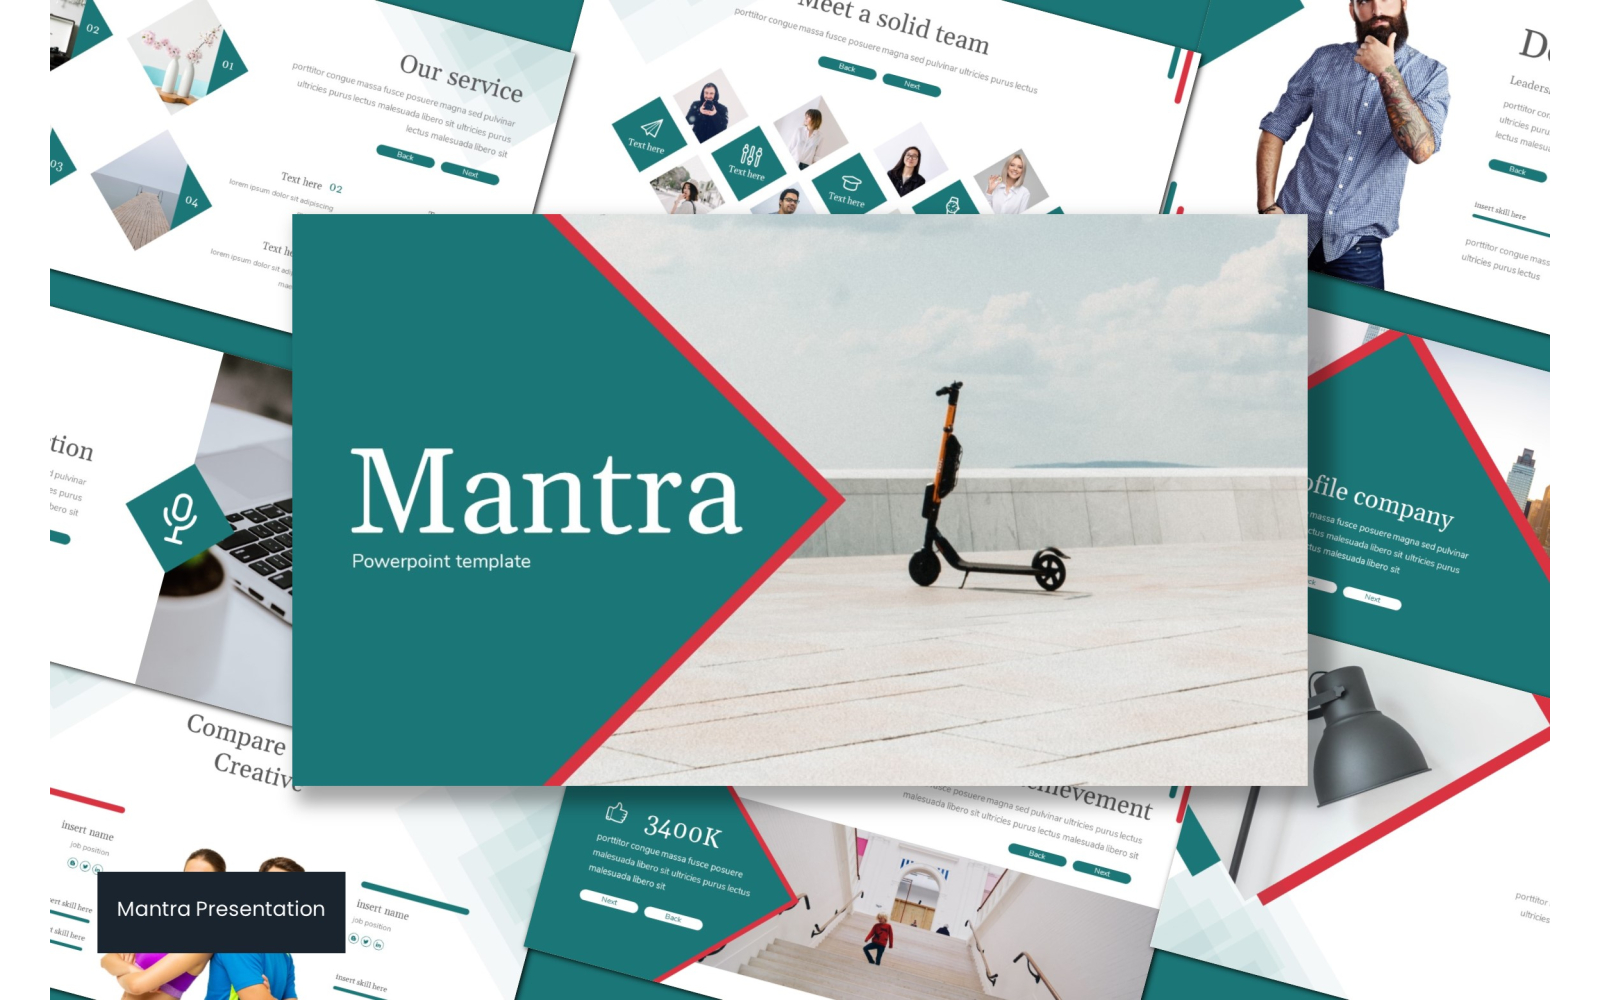 Mantra PowerPoint template